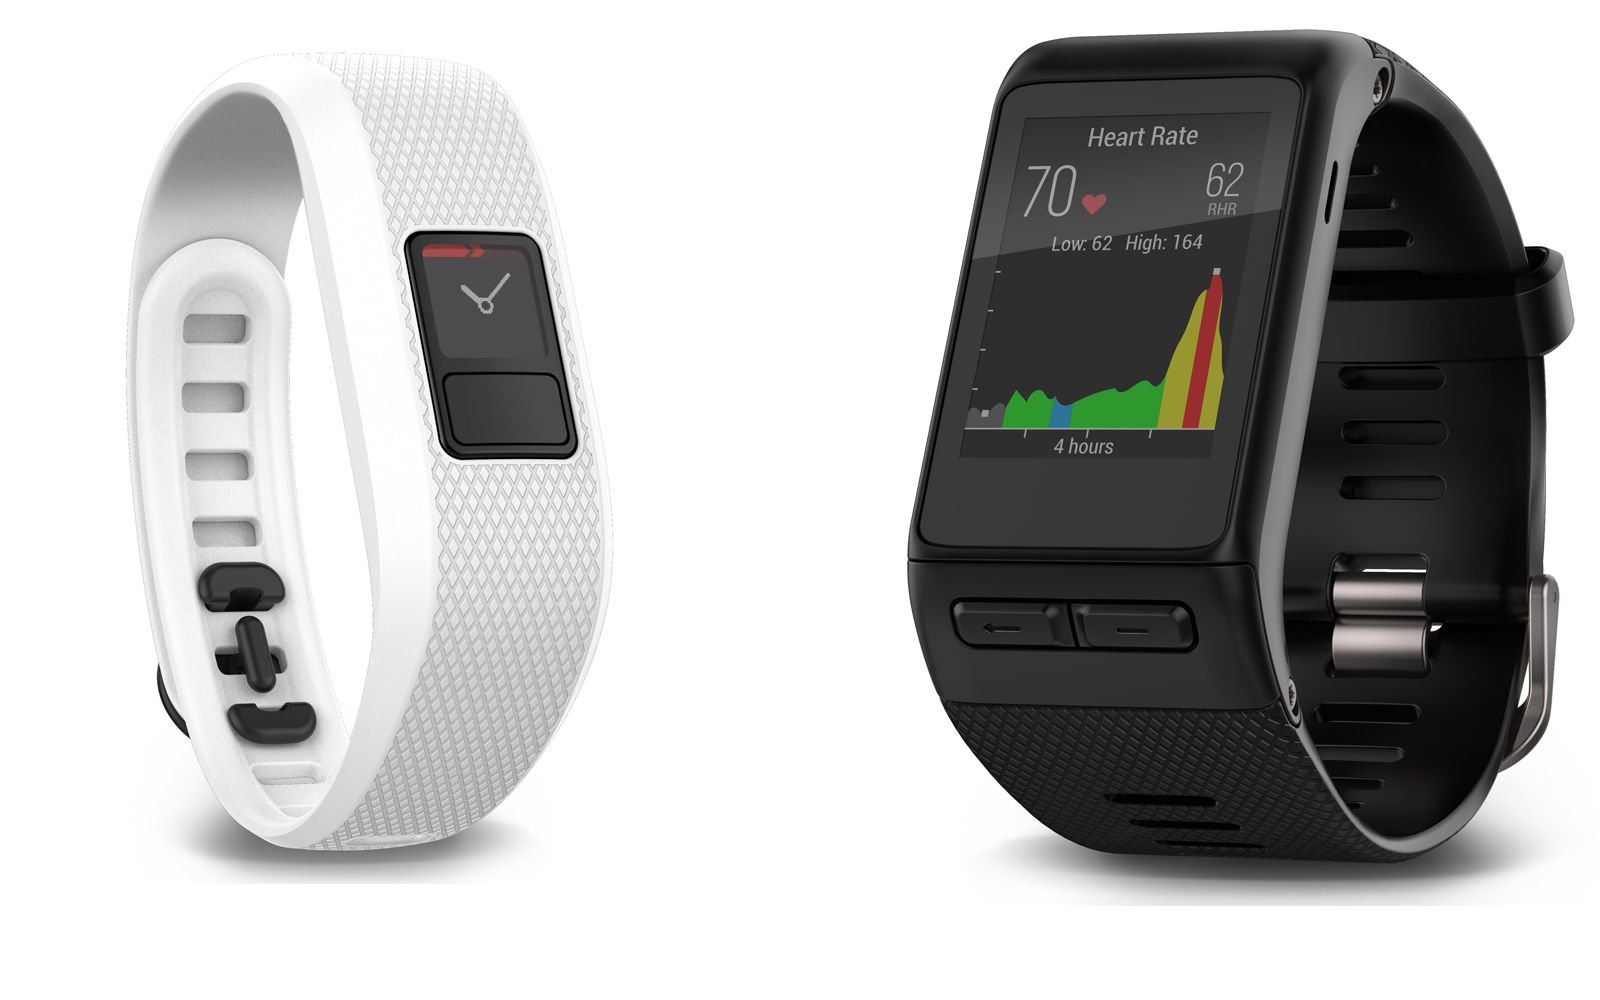 garmin vivoactive hr with gps and vivofit 3 are here to make activity tracking smarter image 1